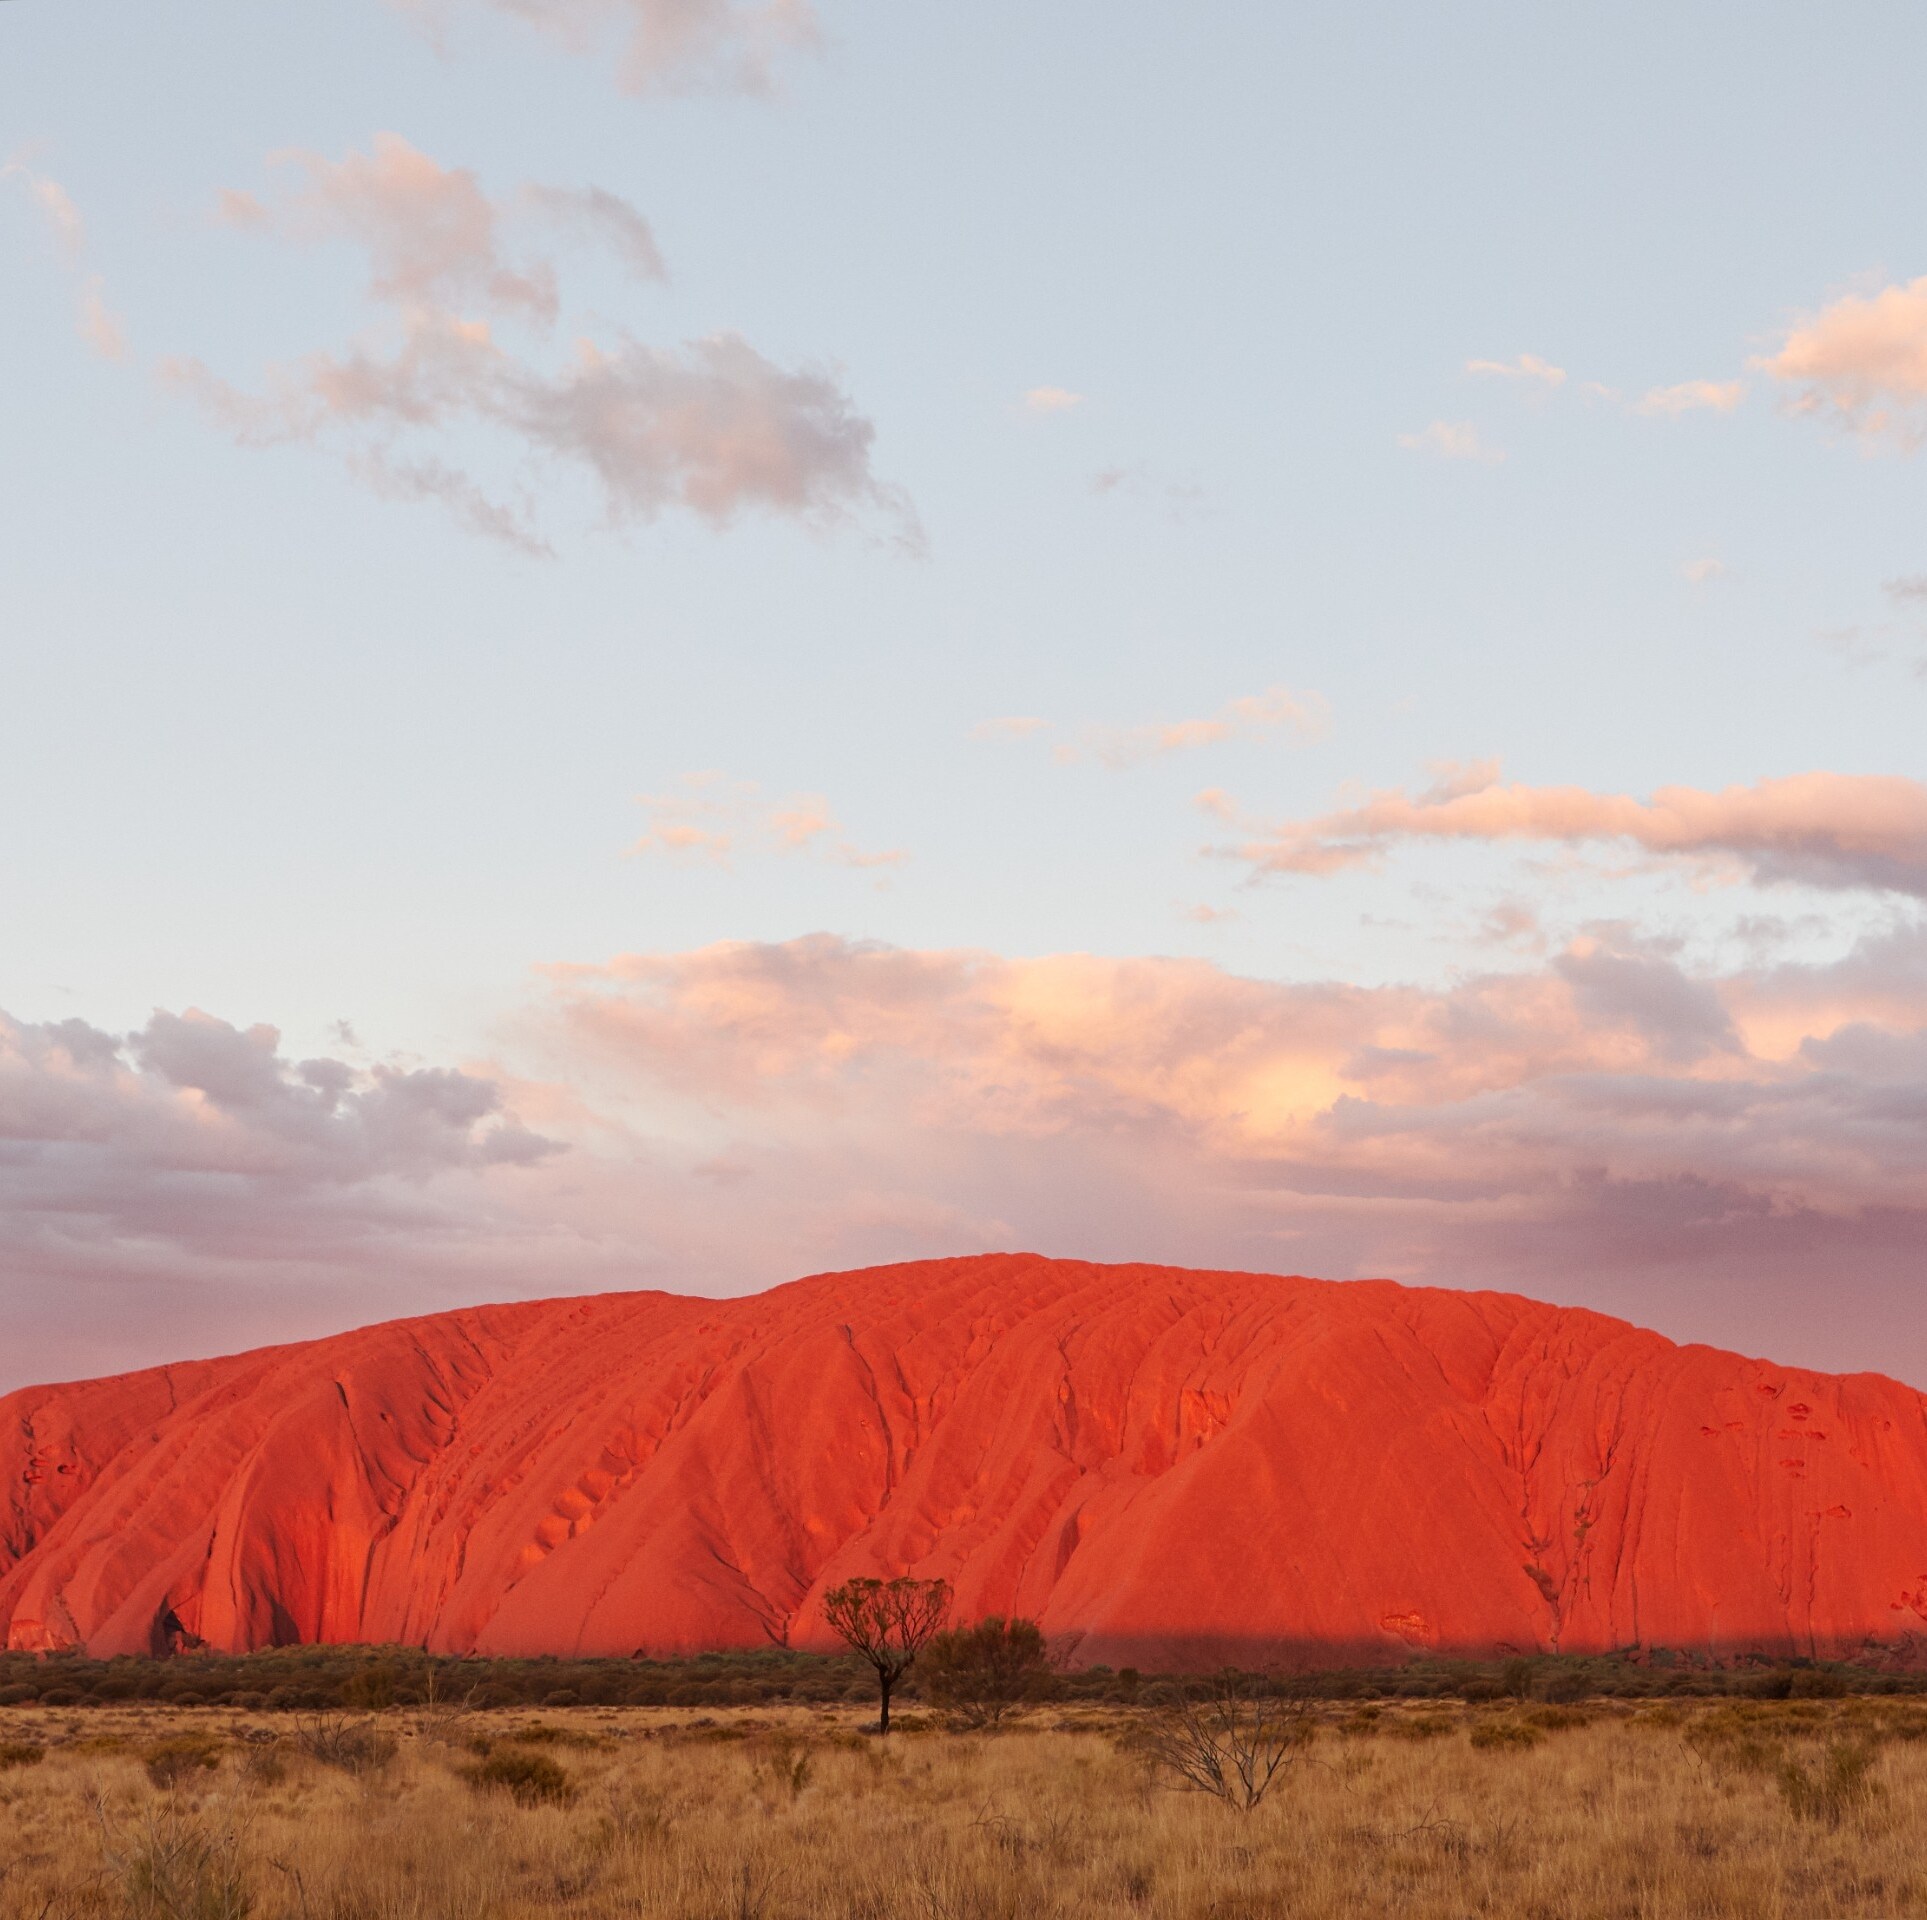 Uluru is a massive sandstone monolith in the heart of the Northern Territory's arid "Red Centre". Uluru is sacred to indigenous Australians and is thought to have started forming around 550 million years ago. © Tourism Northern Territory